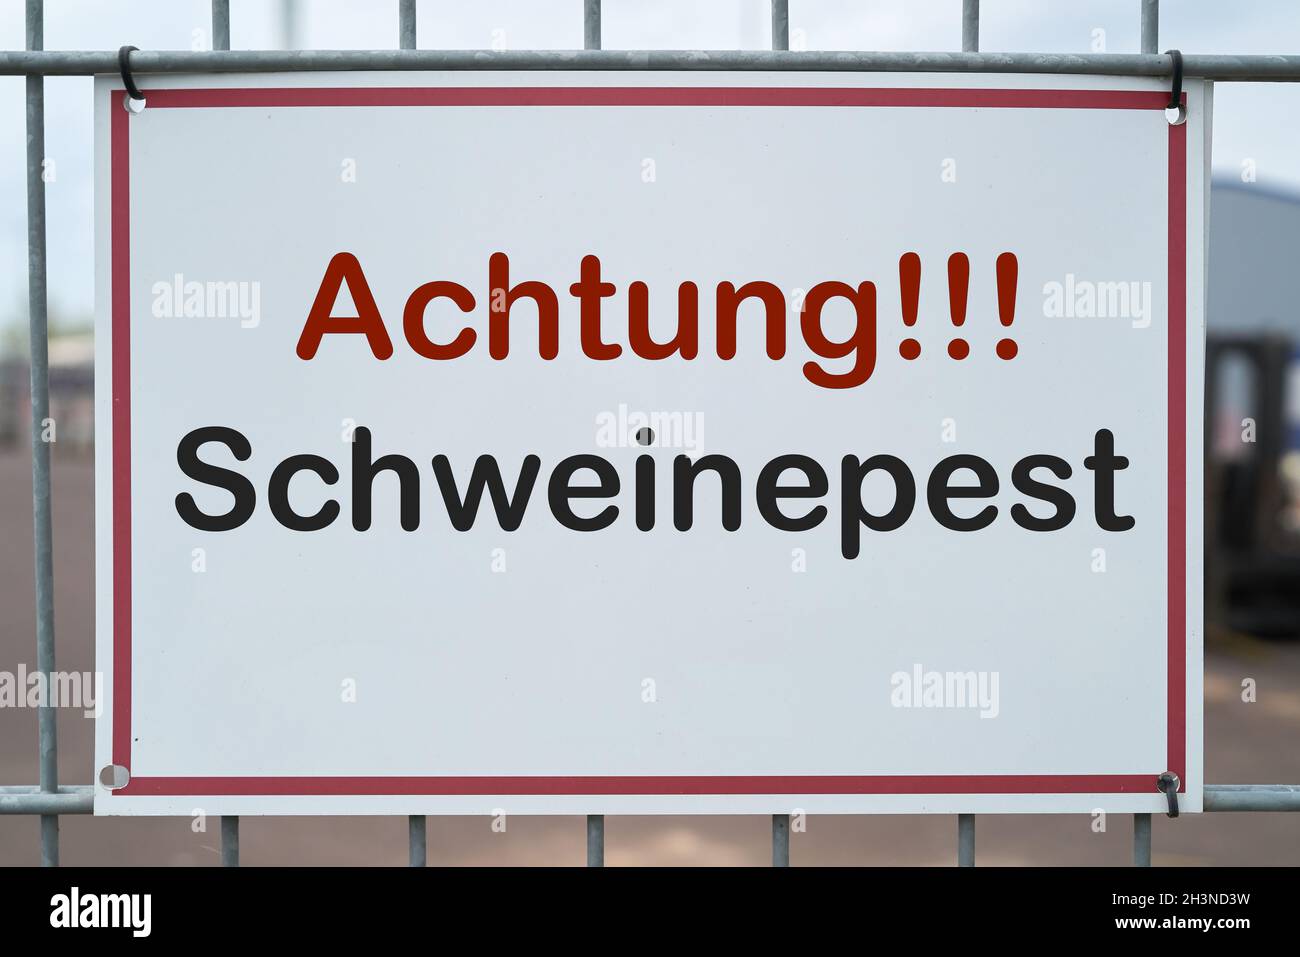 Sign with the inscription Achtung Afrikanische Schweinepest (Attention African swine fever) Stock Photo